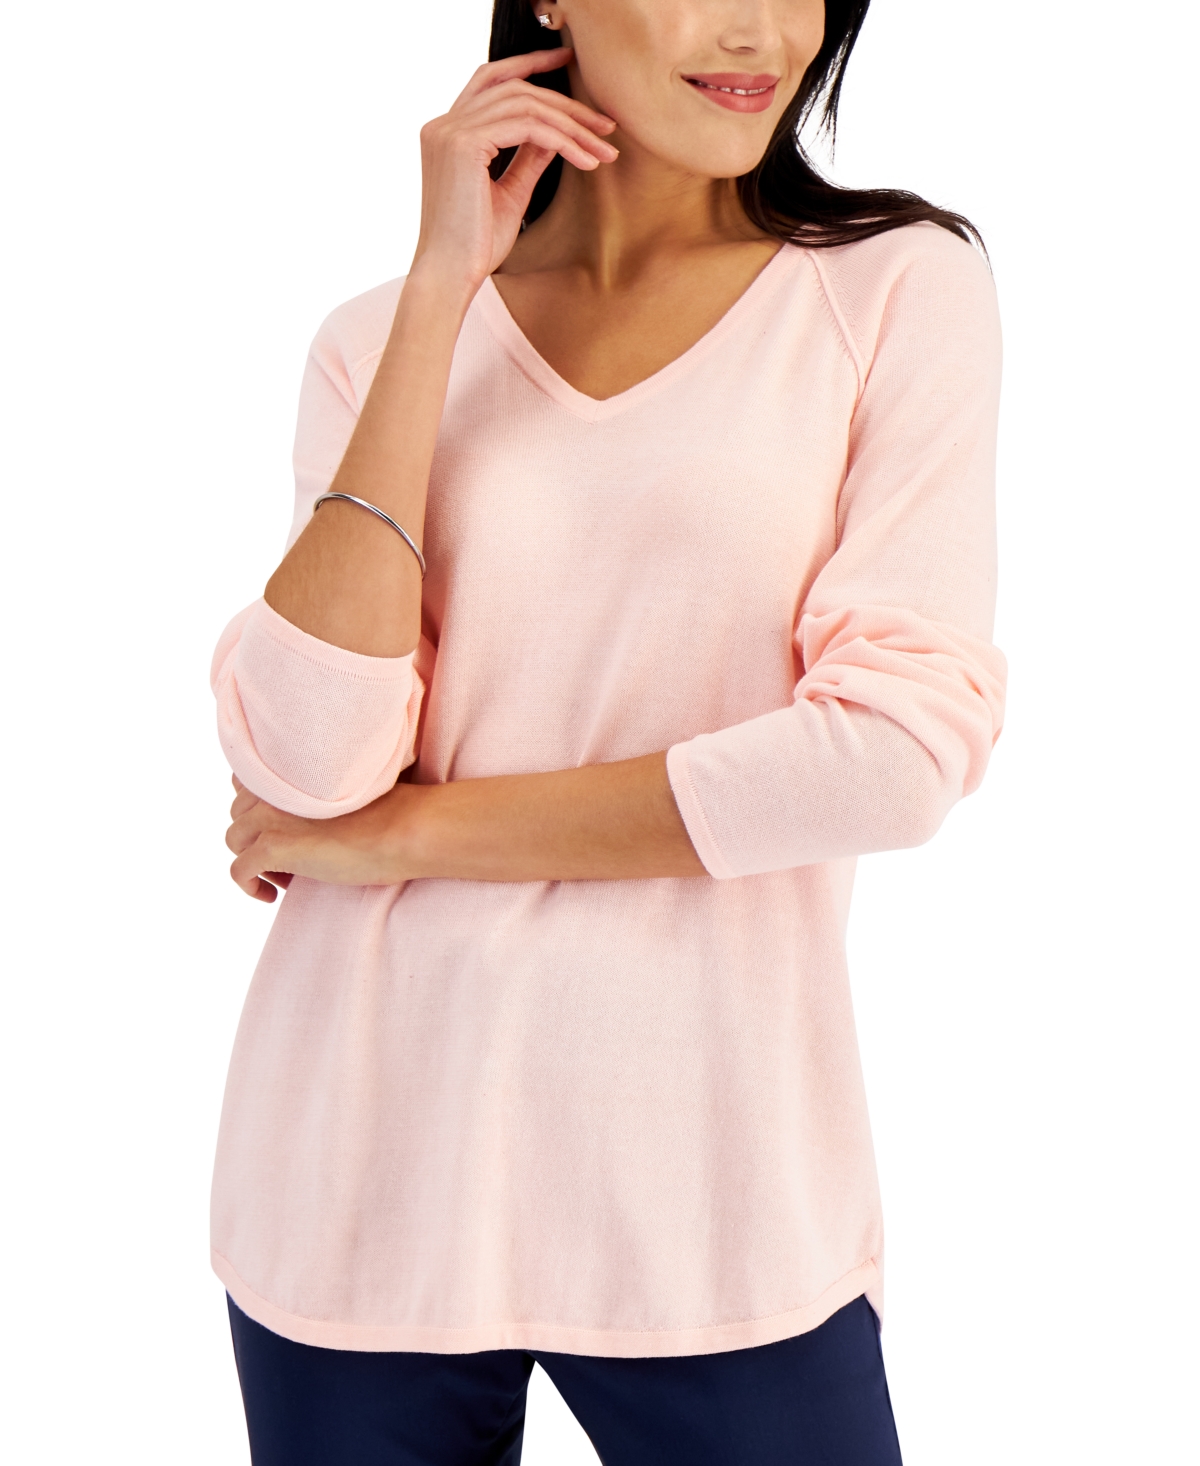 Women's Cotton V-Neck Sweater, Created for Macy's - Soft Pink